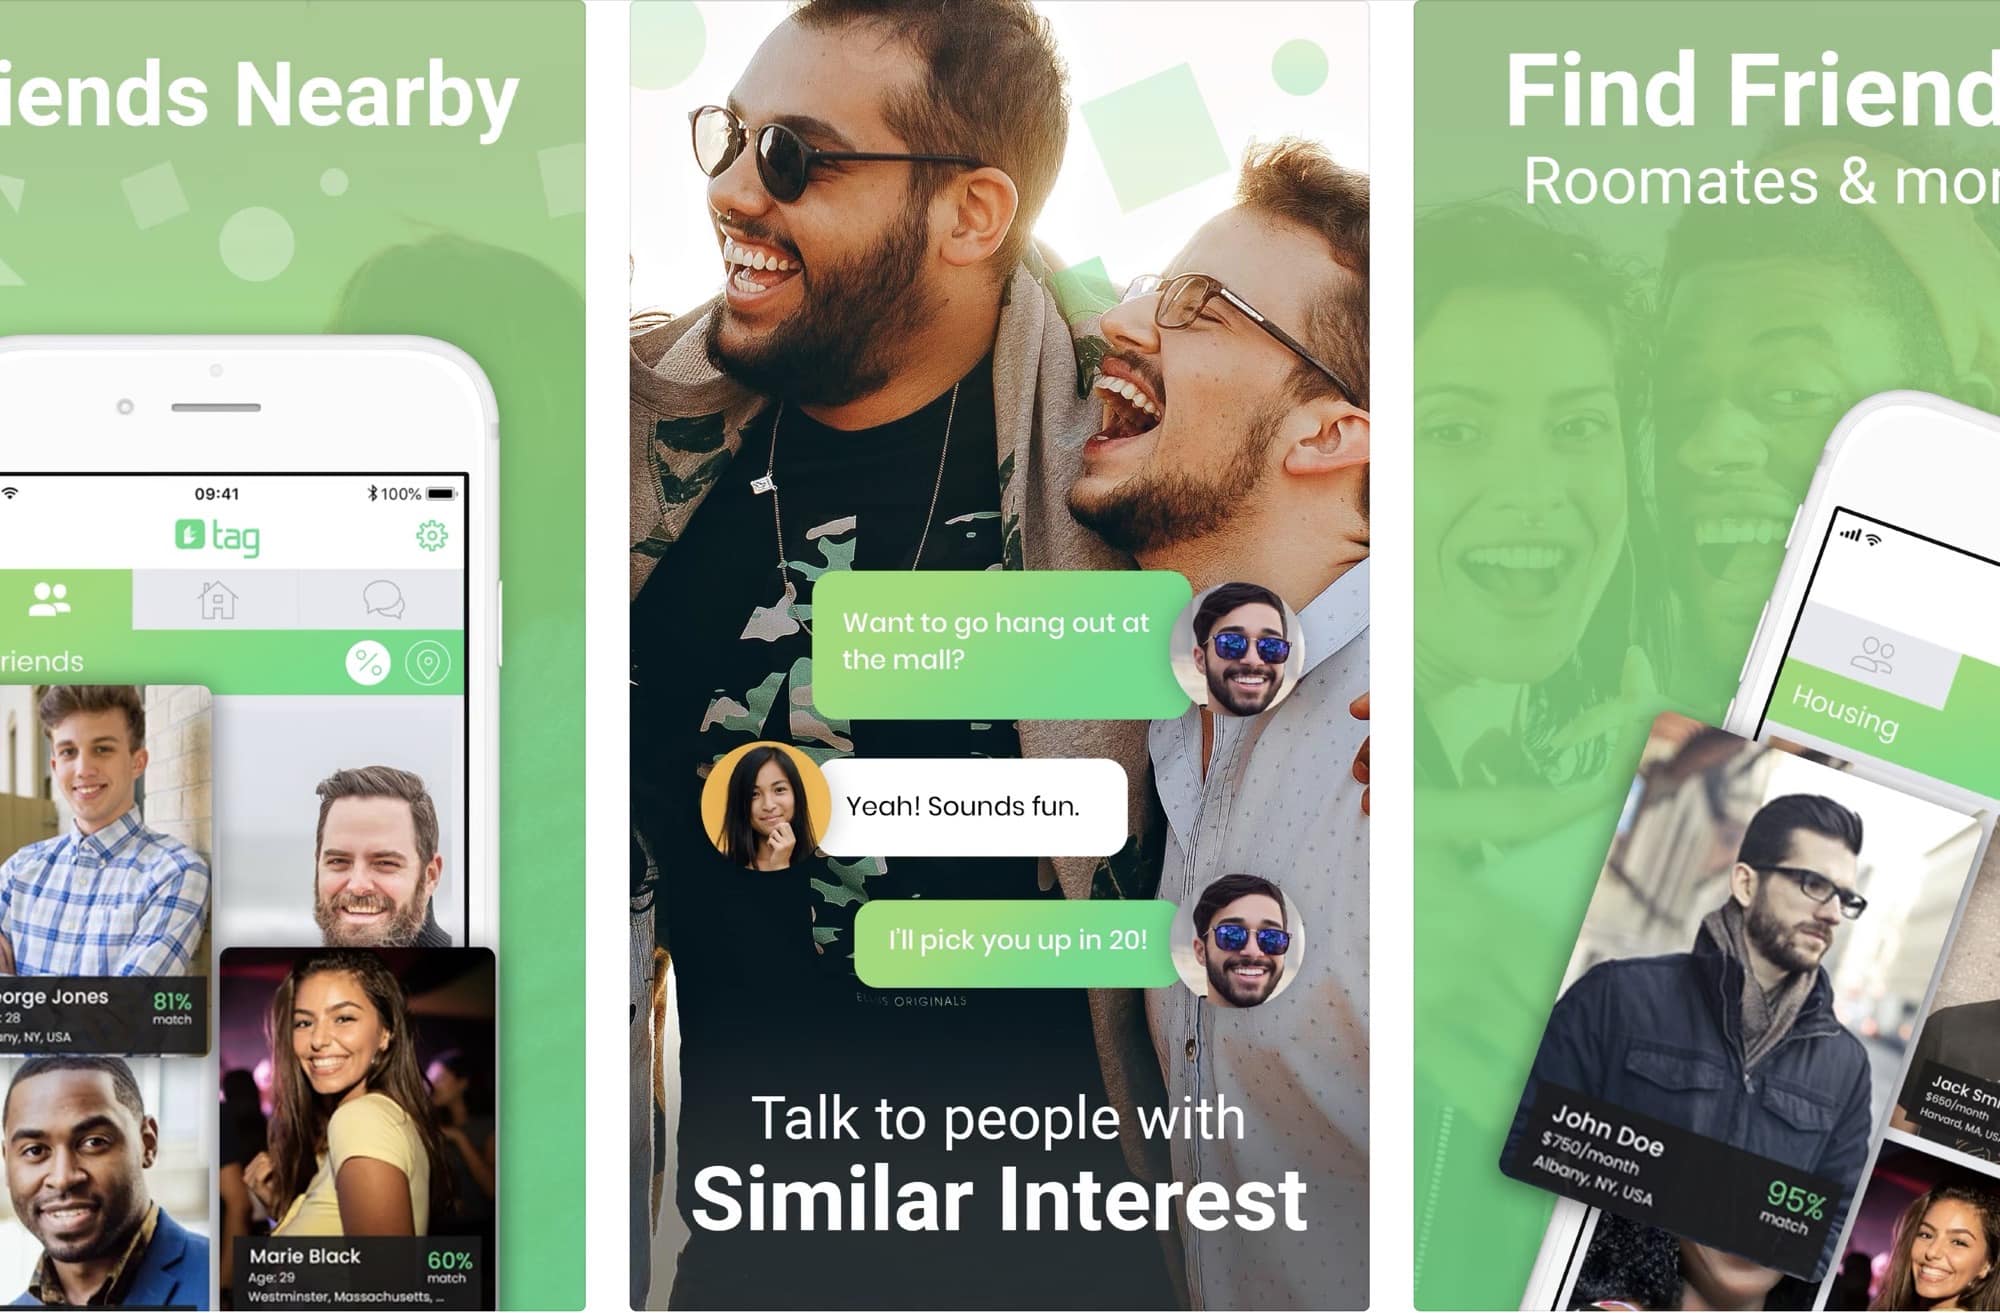 Tag app lets you hook up with locals and make new friends.